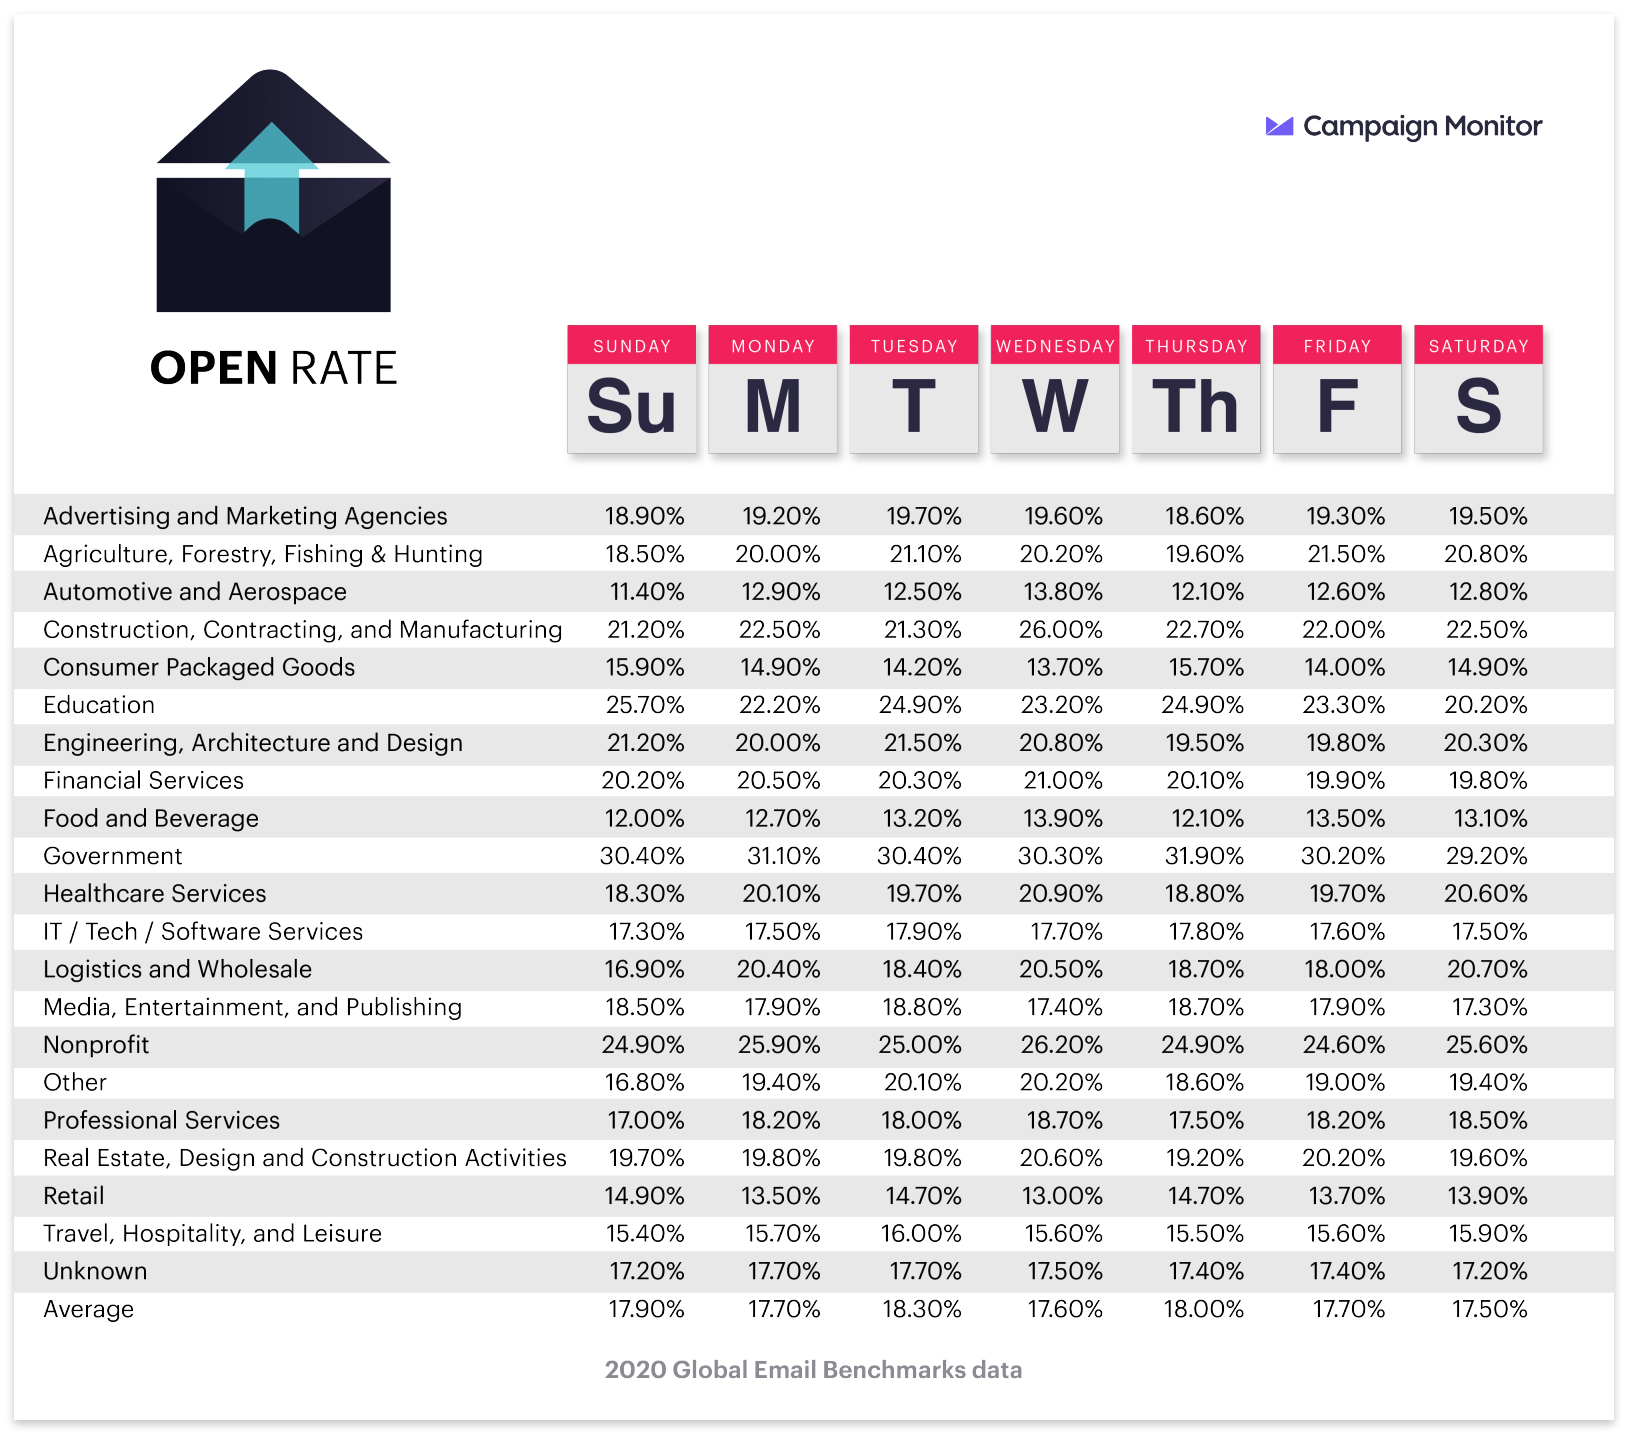 Open rates by industry and day of the week